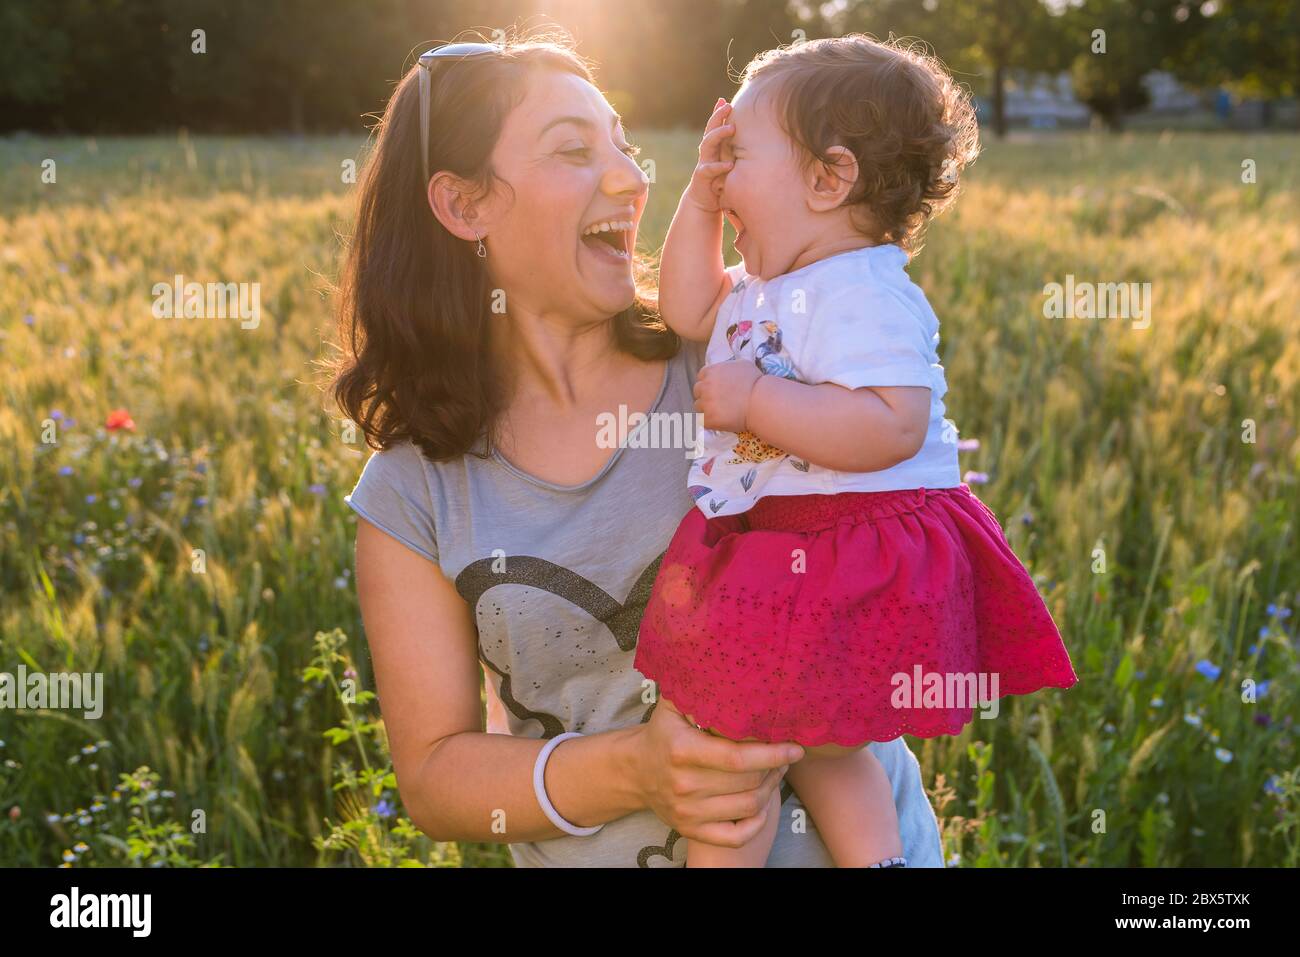 A young mother holds her baby girl in her arms as they laugh together outside on a sunny day. Stock Photo